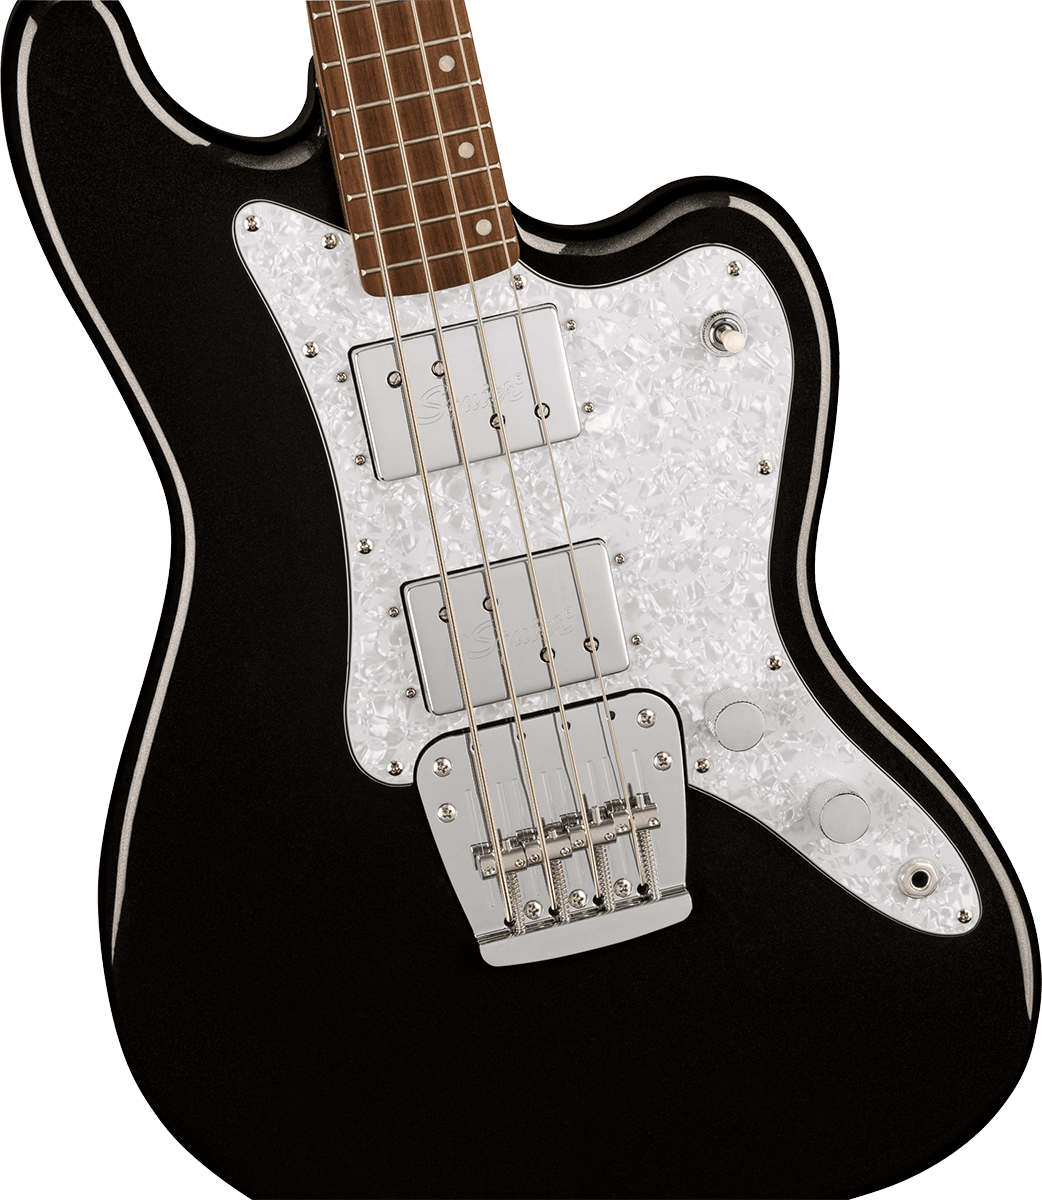 Paranormal Rascal HH Metallic Black - Bass by Squier at Muso's Stuff